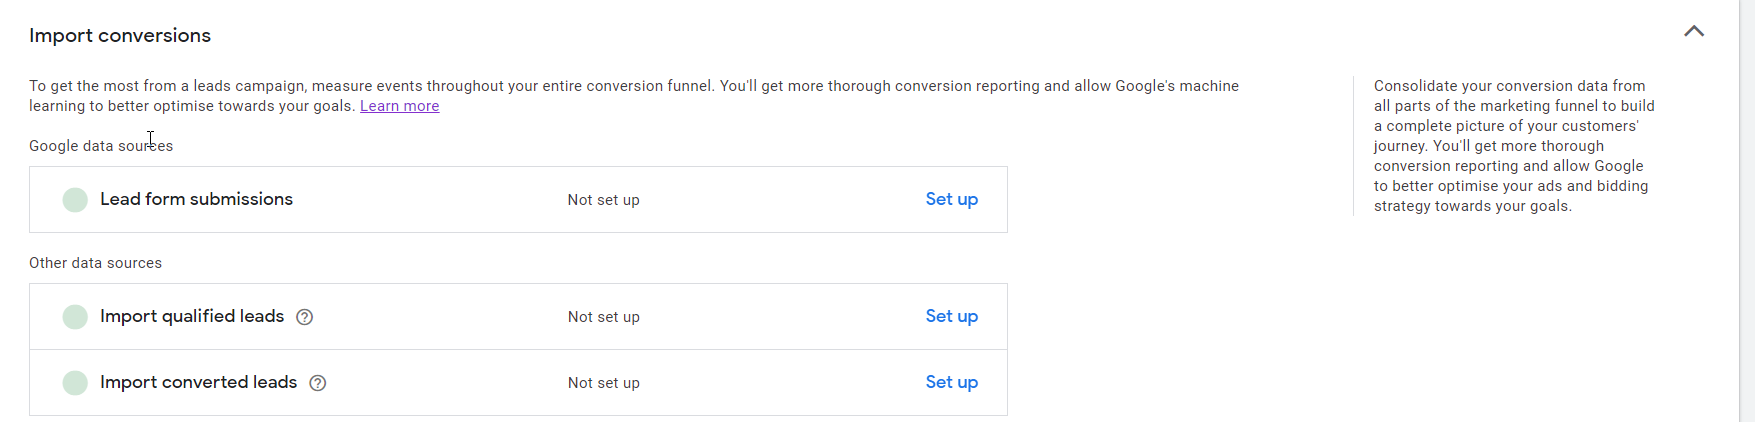 Import Conversions From Google Ads Submissions Qualifed And Converted Leads